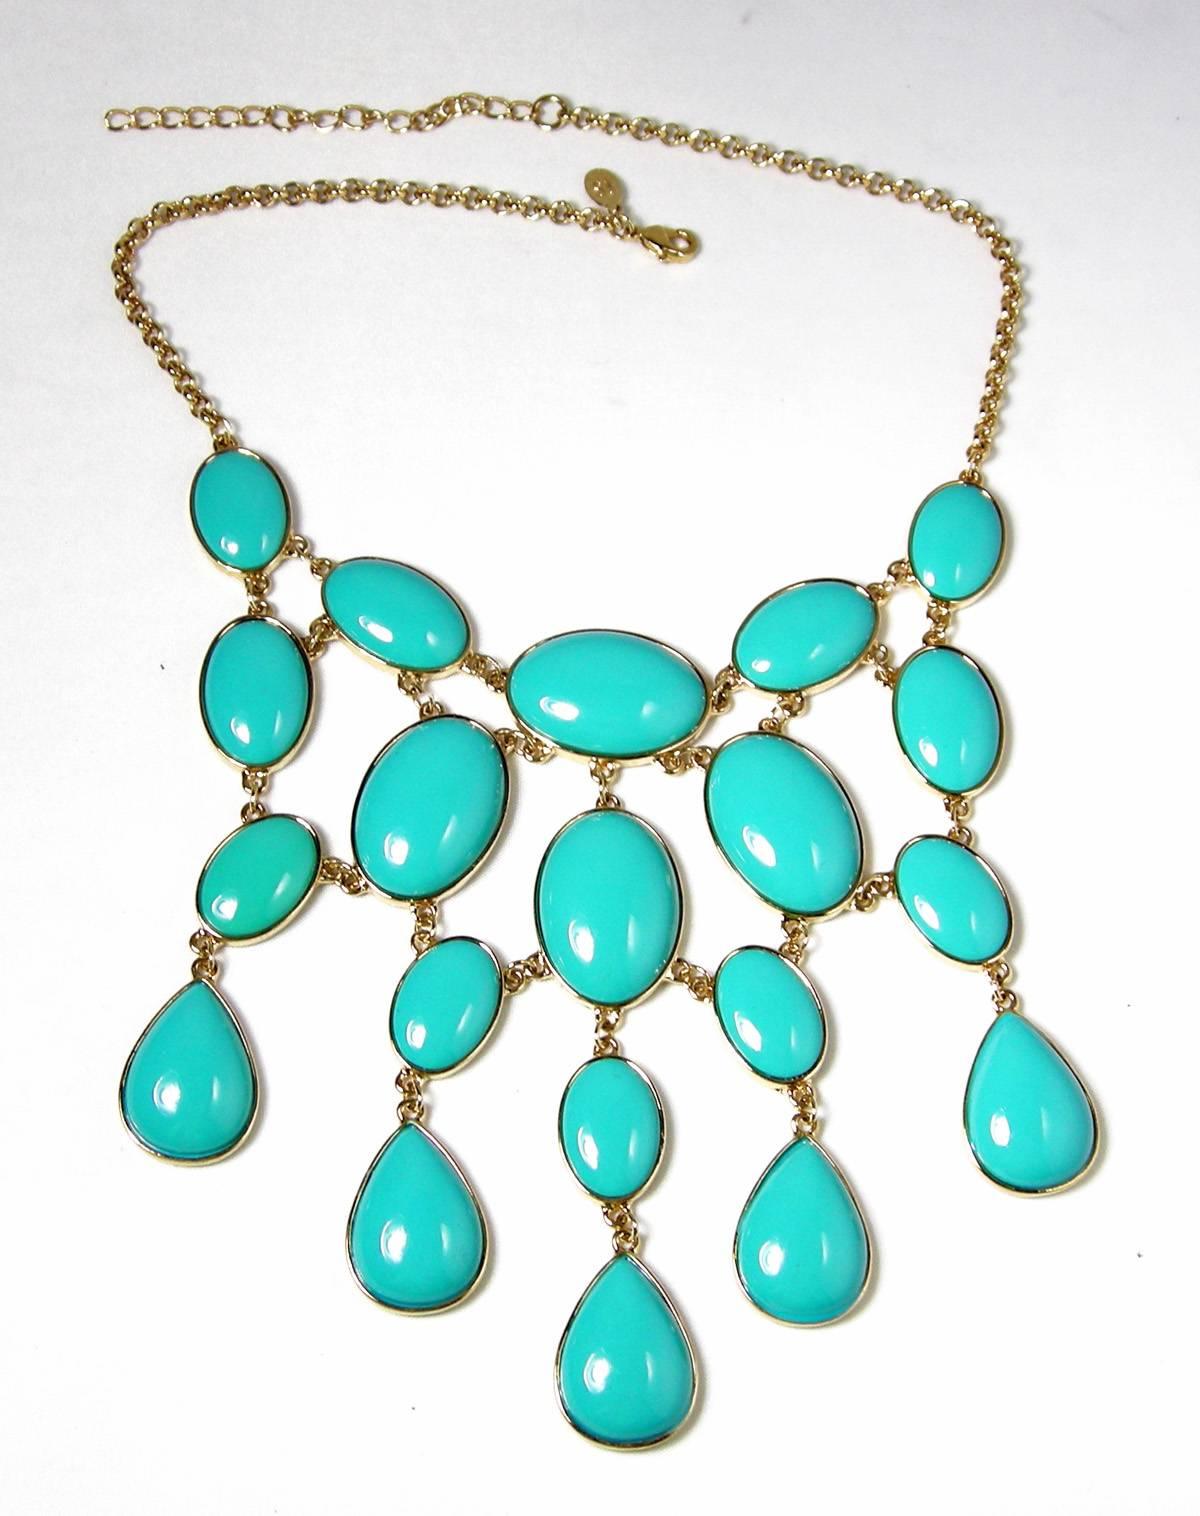 This a great Kenneth Jay Lane bib necklace has a gold tone rope chain leading to various oval and teardrop shaped faux turquoise stones.  It has a lobster clap and the necklaces measures 16” long.  The centerpiece is 5” wide and falls 4-3/4”.  It is